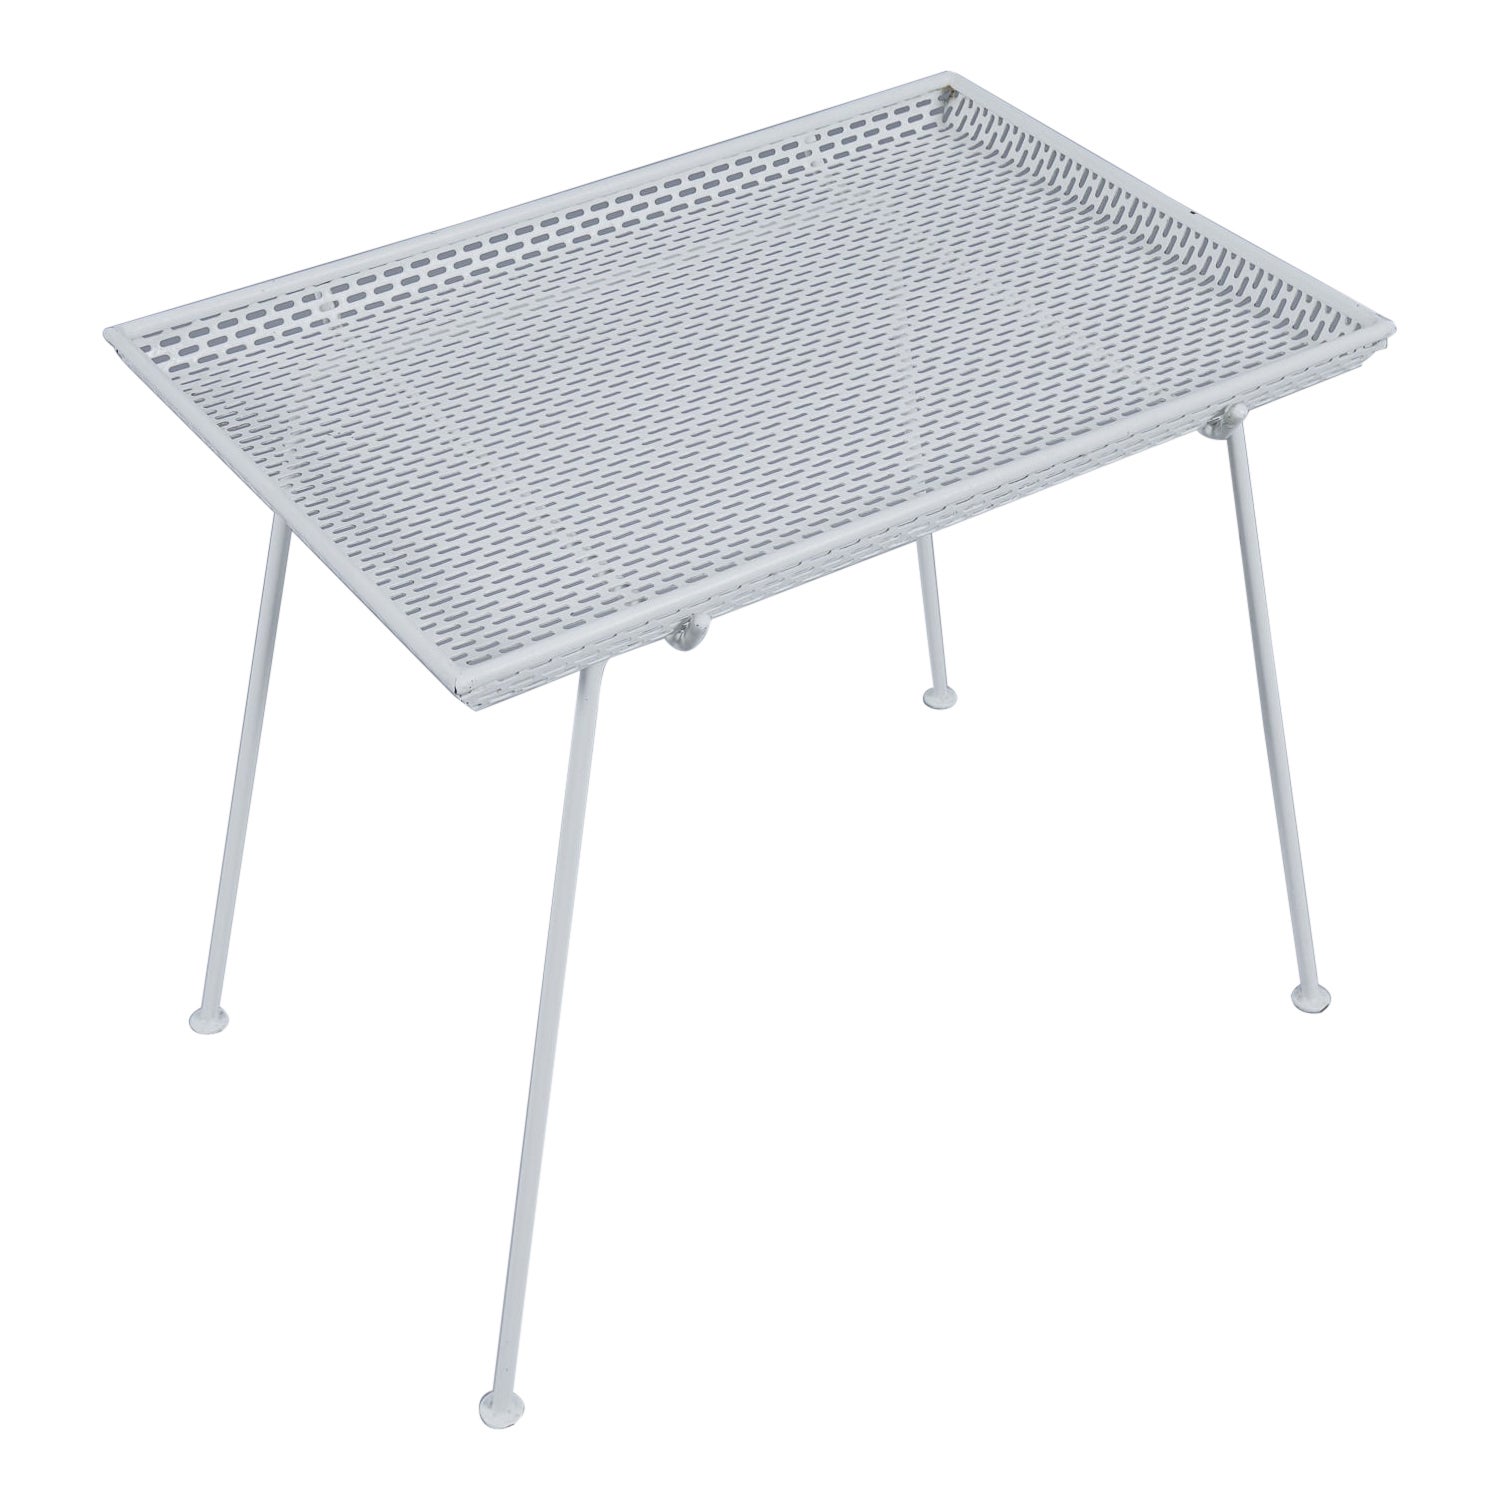 French Side Table in Perforated White Lacquered Metal With Removable Tray, 1950s For Sale